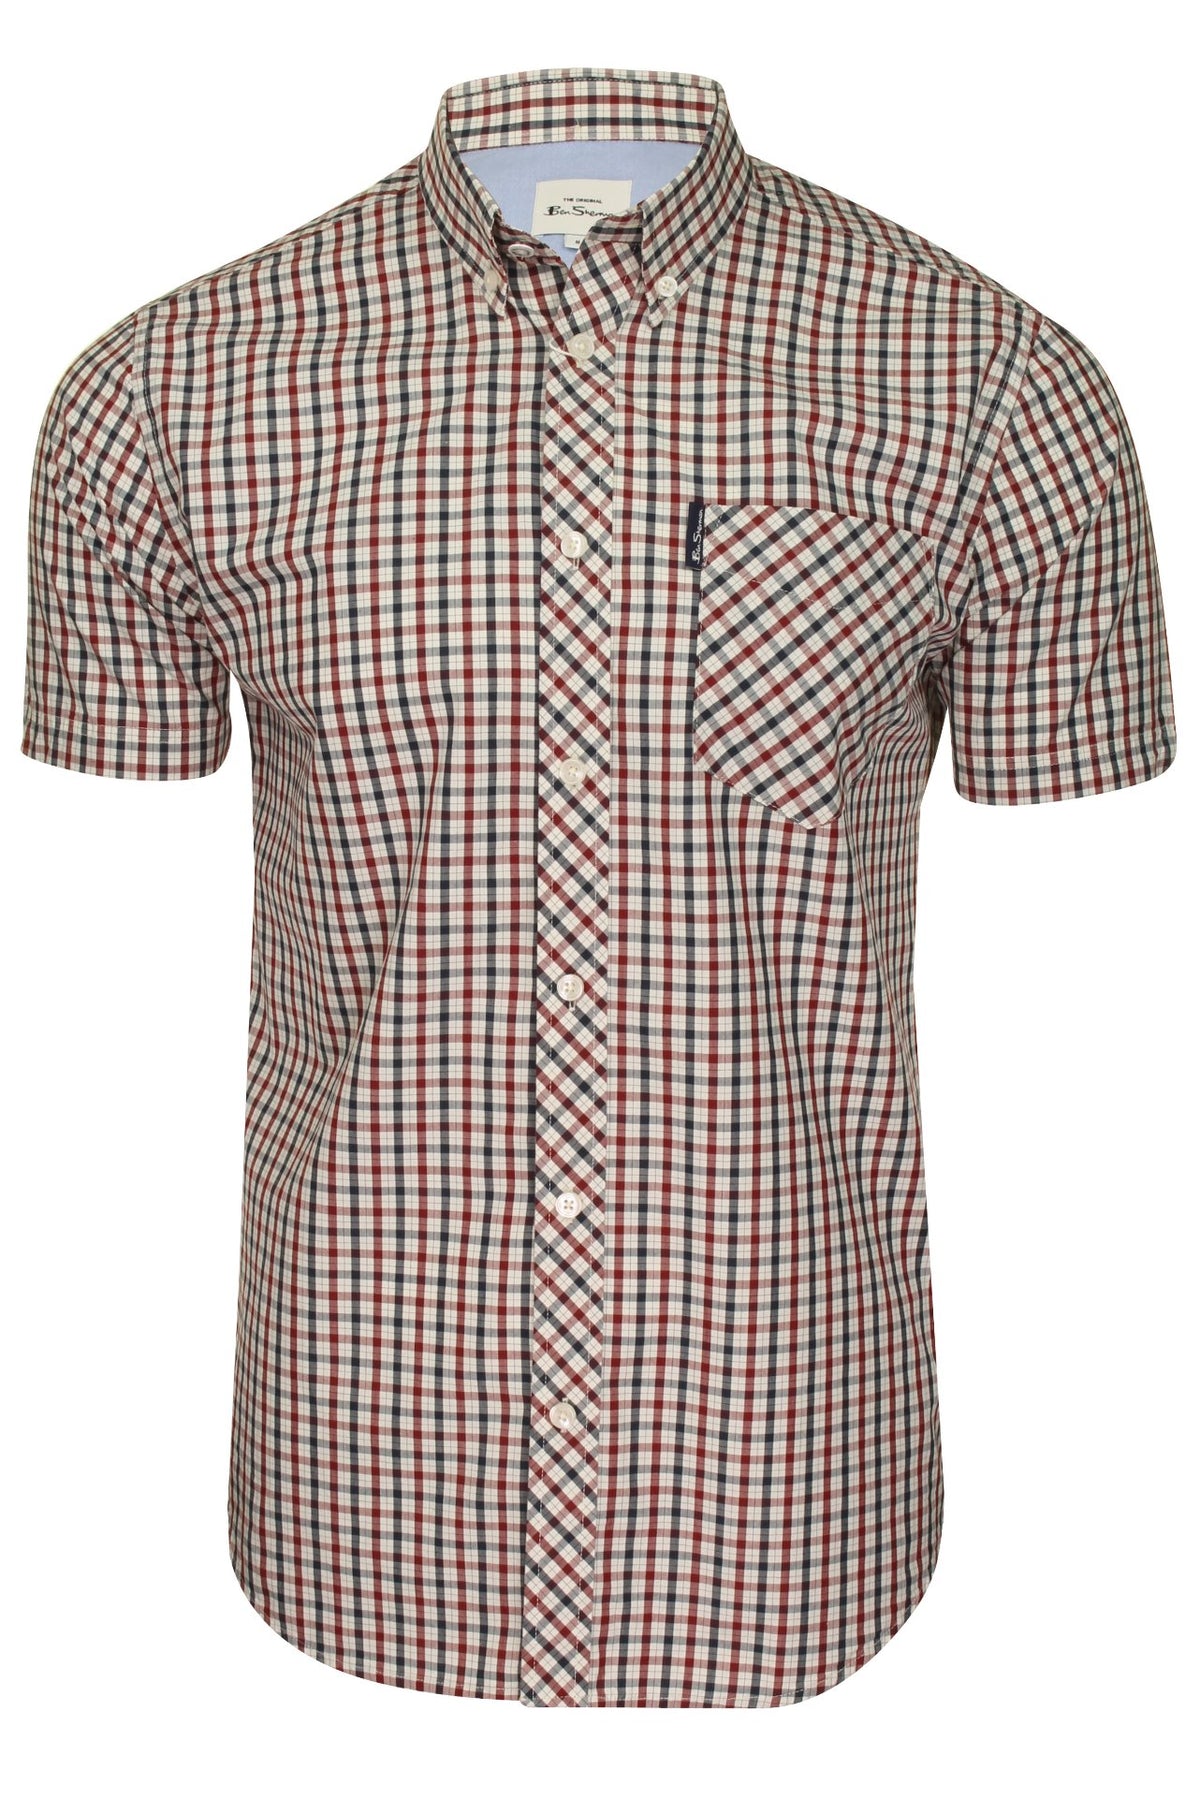 Ben Sherman Mens Signature House Check Shirt - Short Sleeved (Red, S), 01, 59144, Red